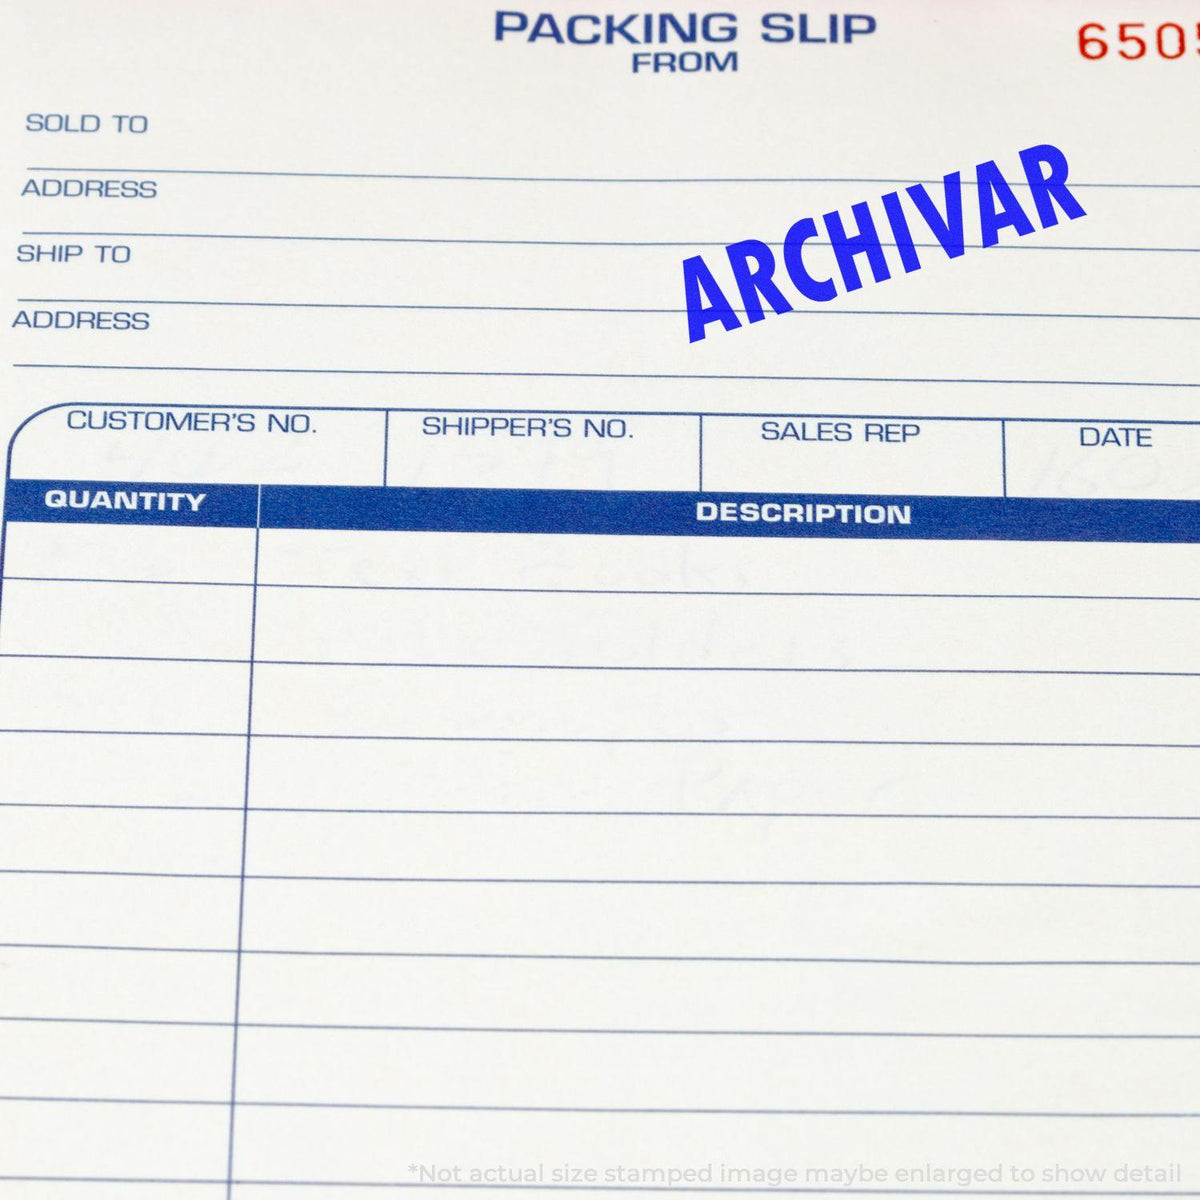 Large Self-Inking Archivar Stamp In Use Photo